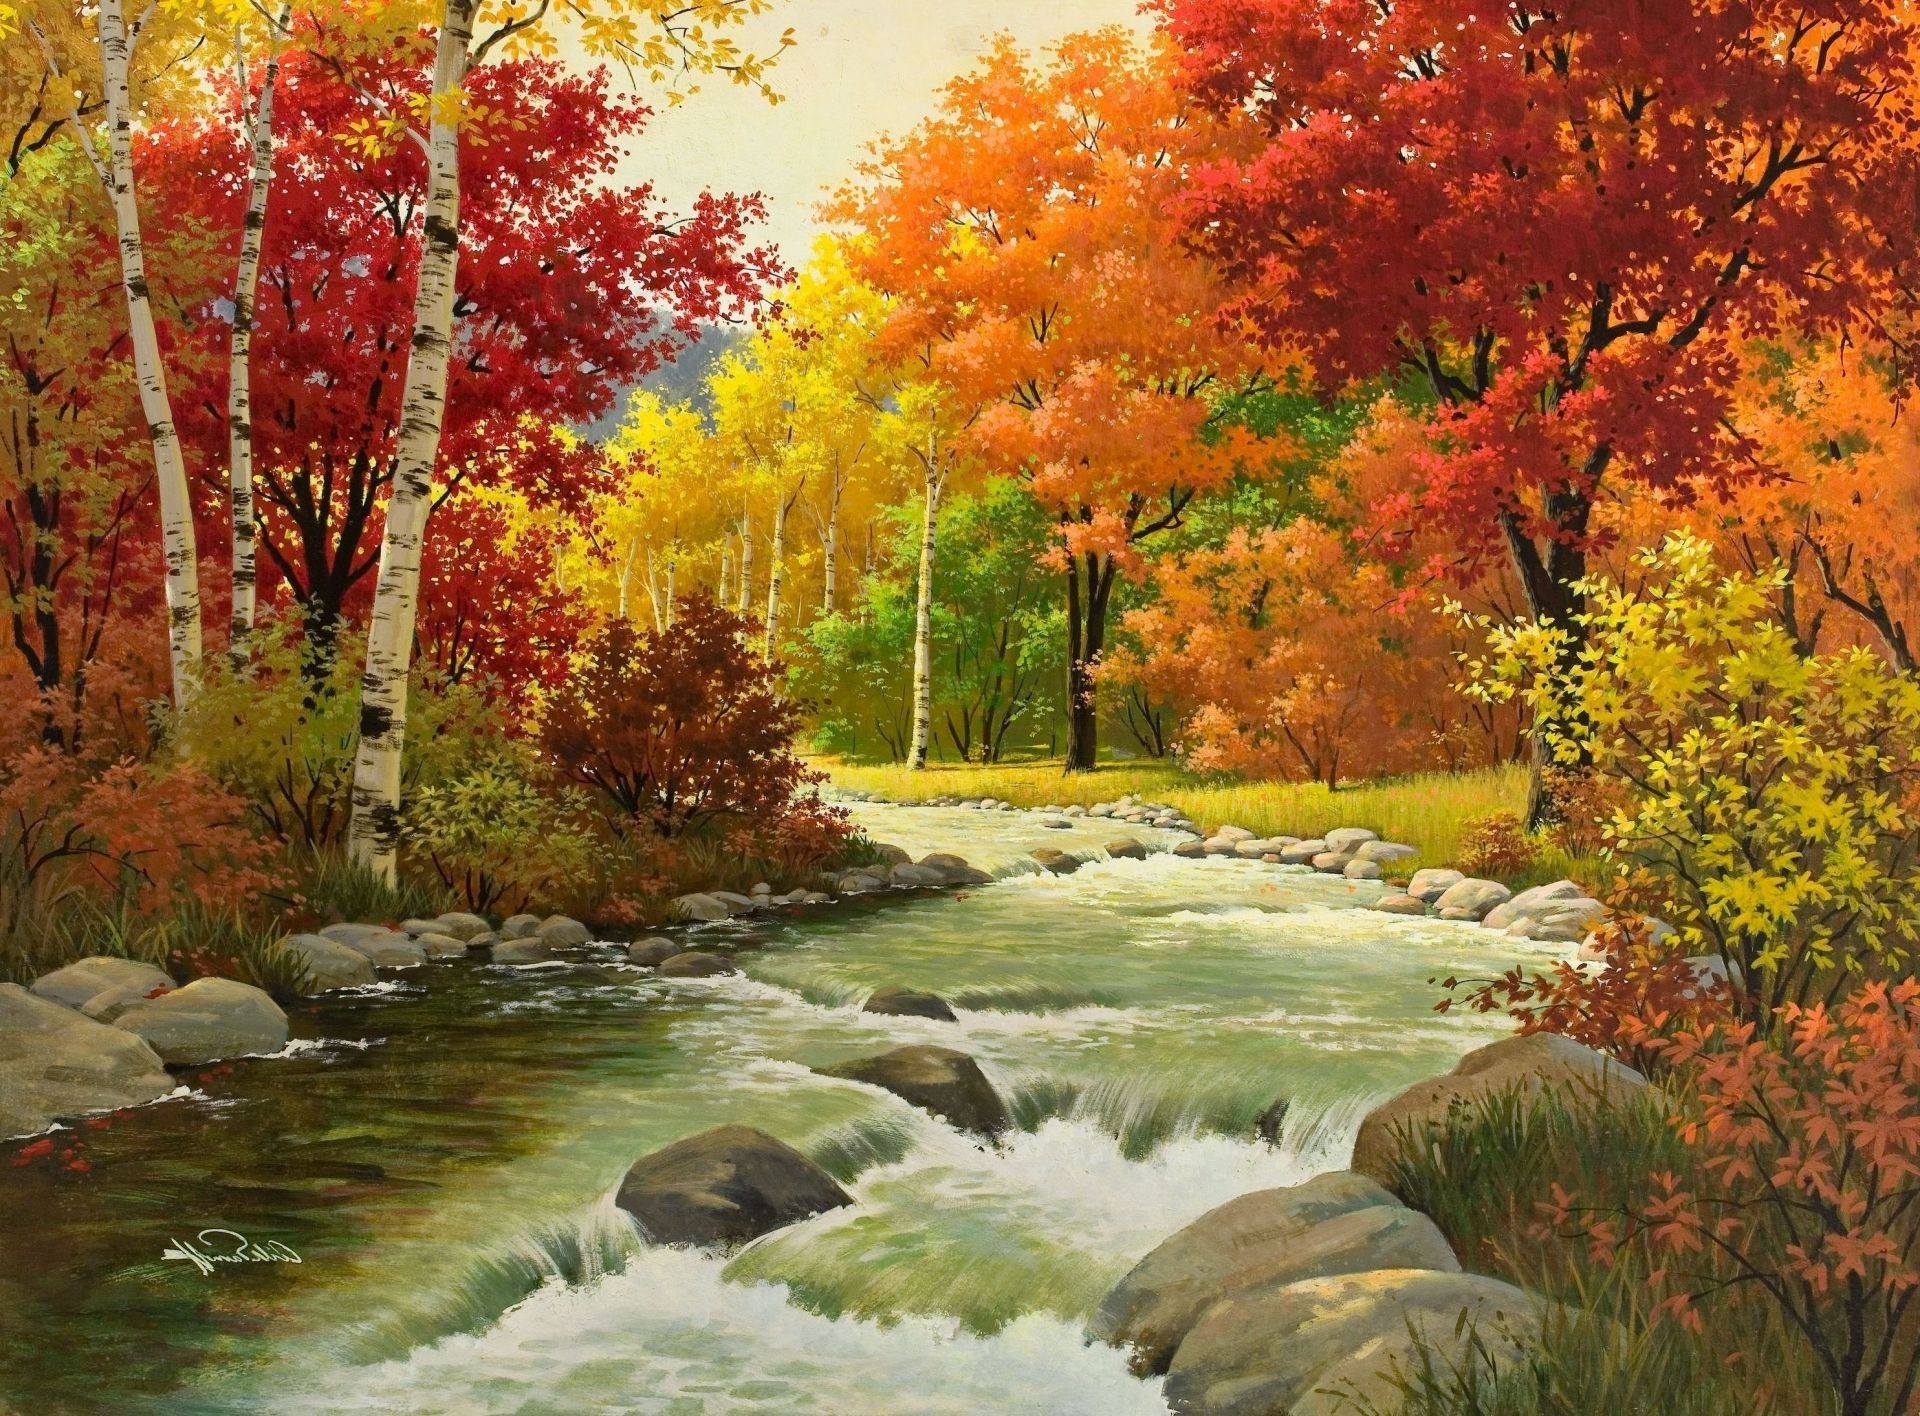 Autumn Arthur saron sarnoff trees forest nature picture - Phone wallpapers